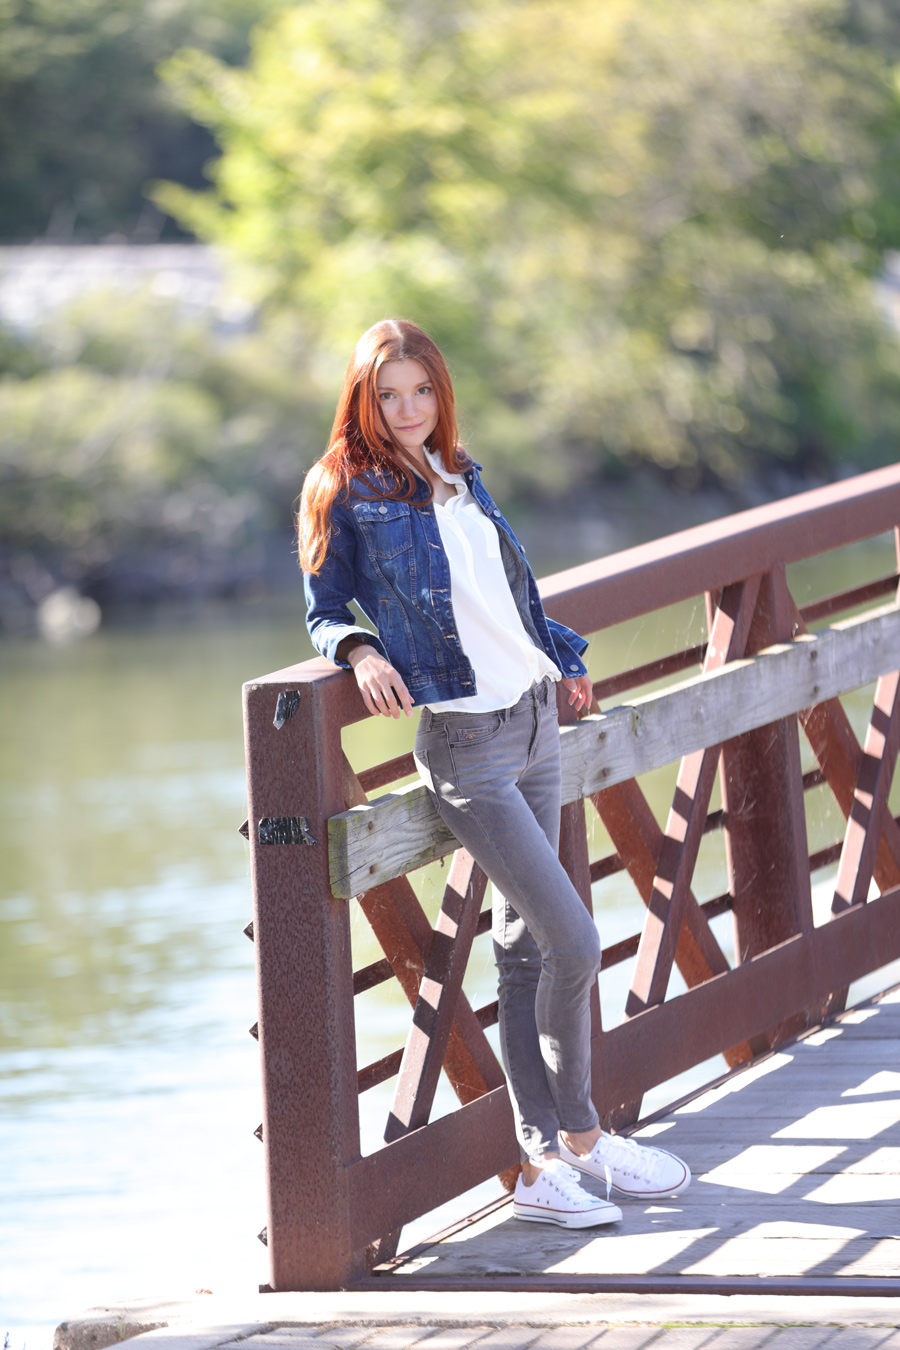 Natalie Soul Life Style Blog. Fall walk Outfit. Armani Exchange grey skinny jeans and Express white shirt.